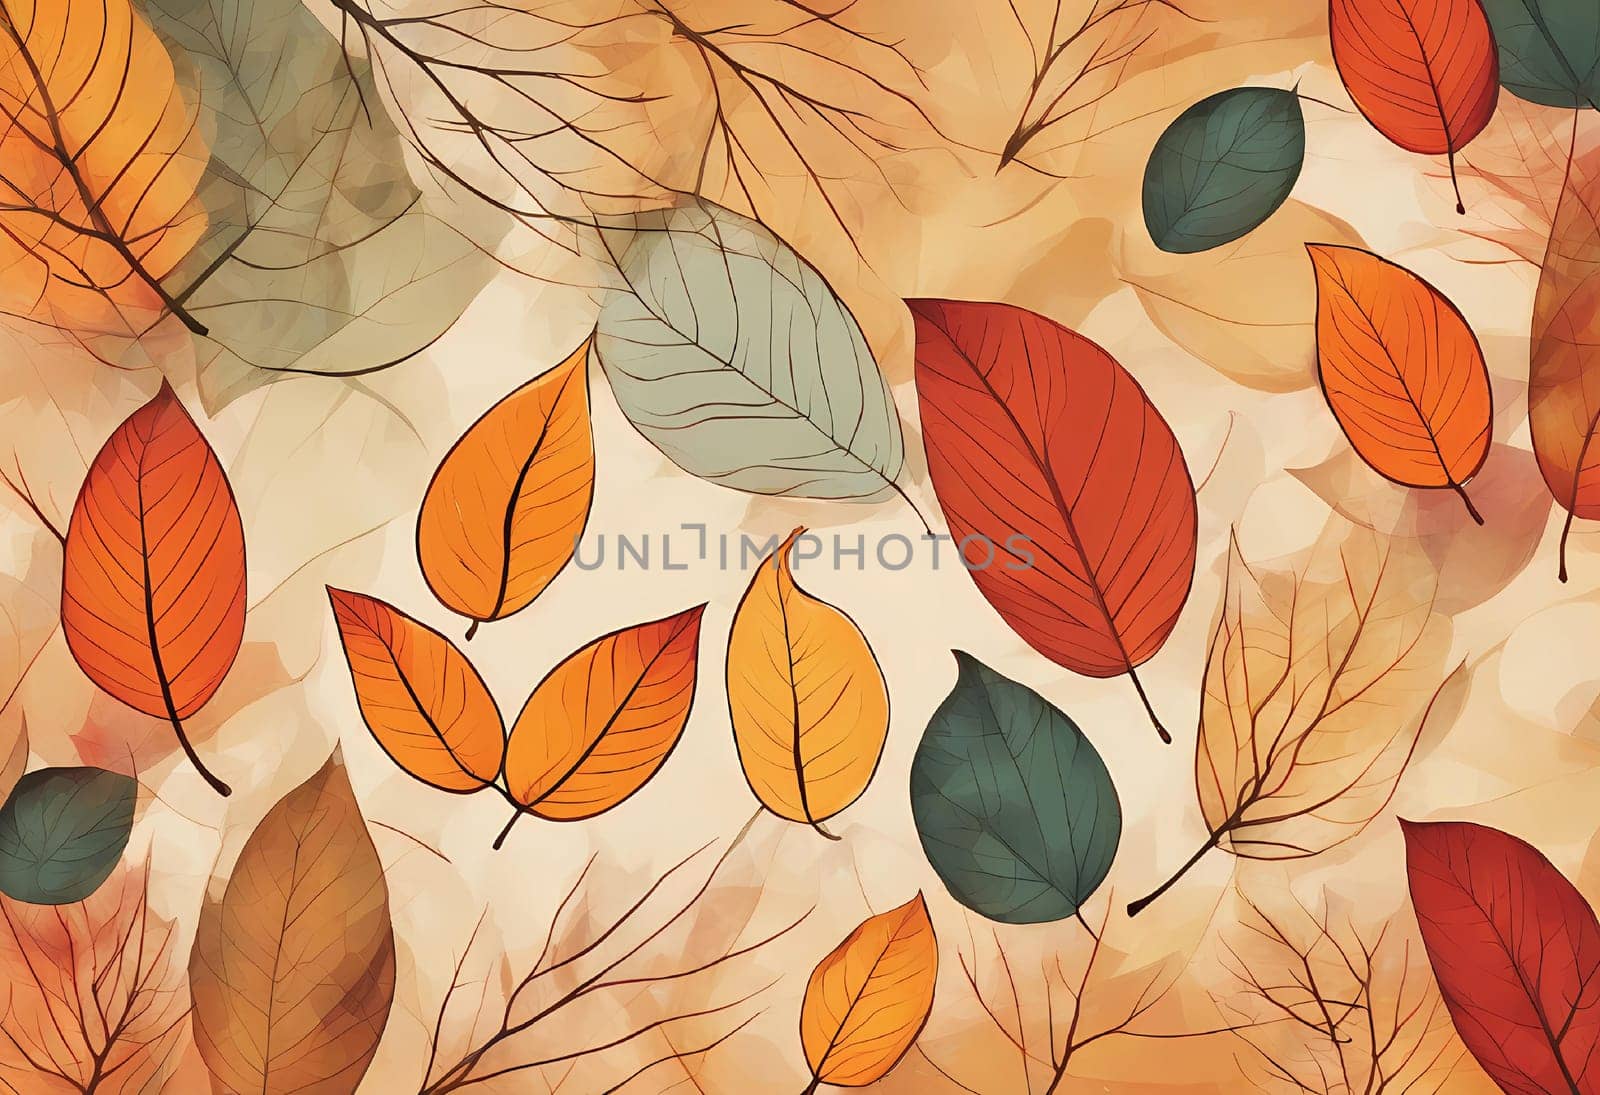 Autumn background. Autumn colored leaves with background in abstract autumn colors by rostik924